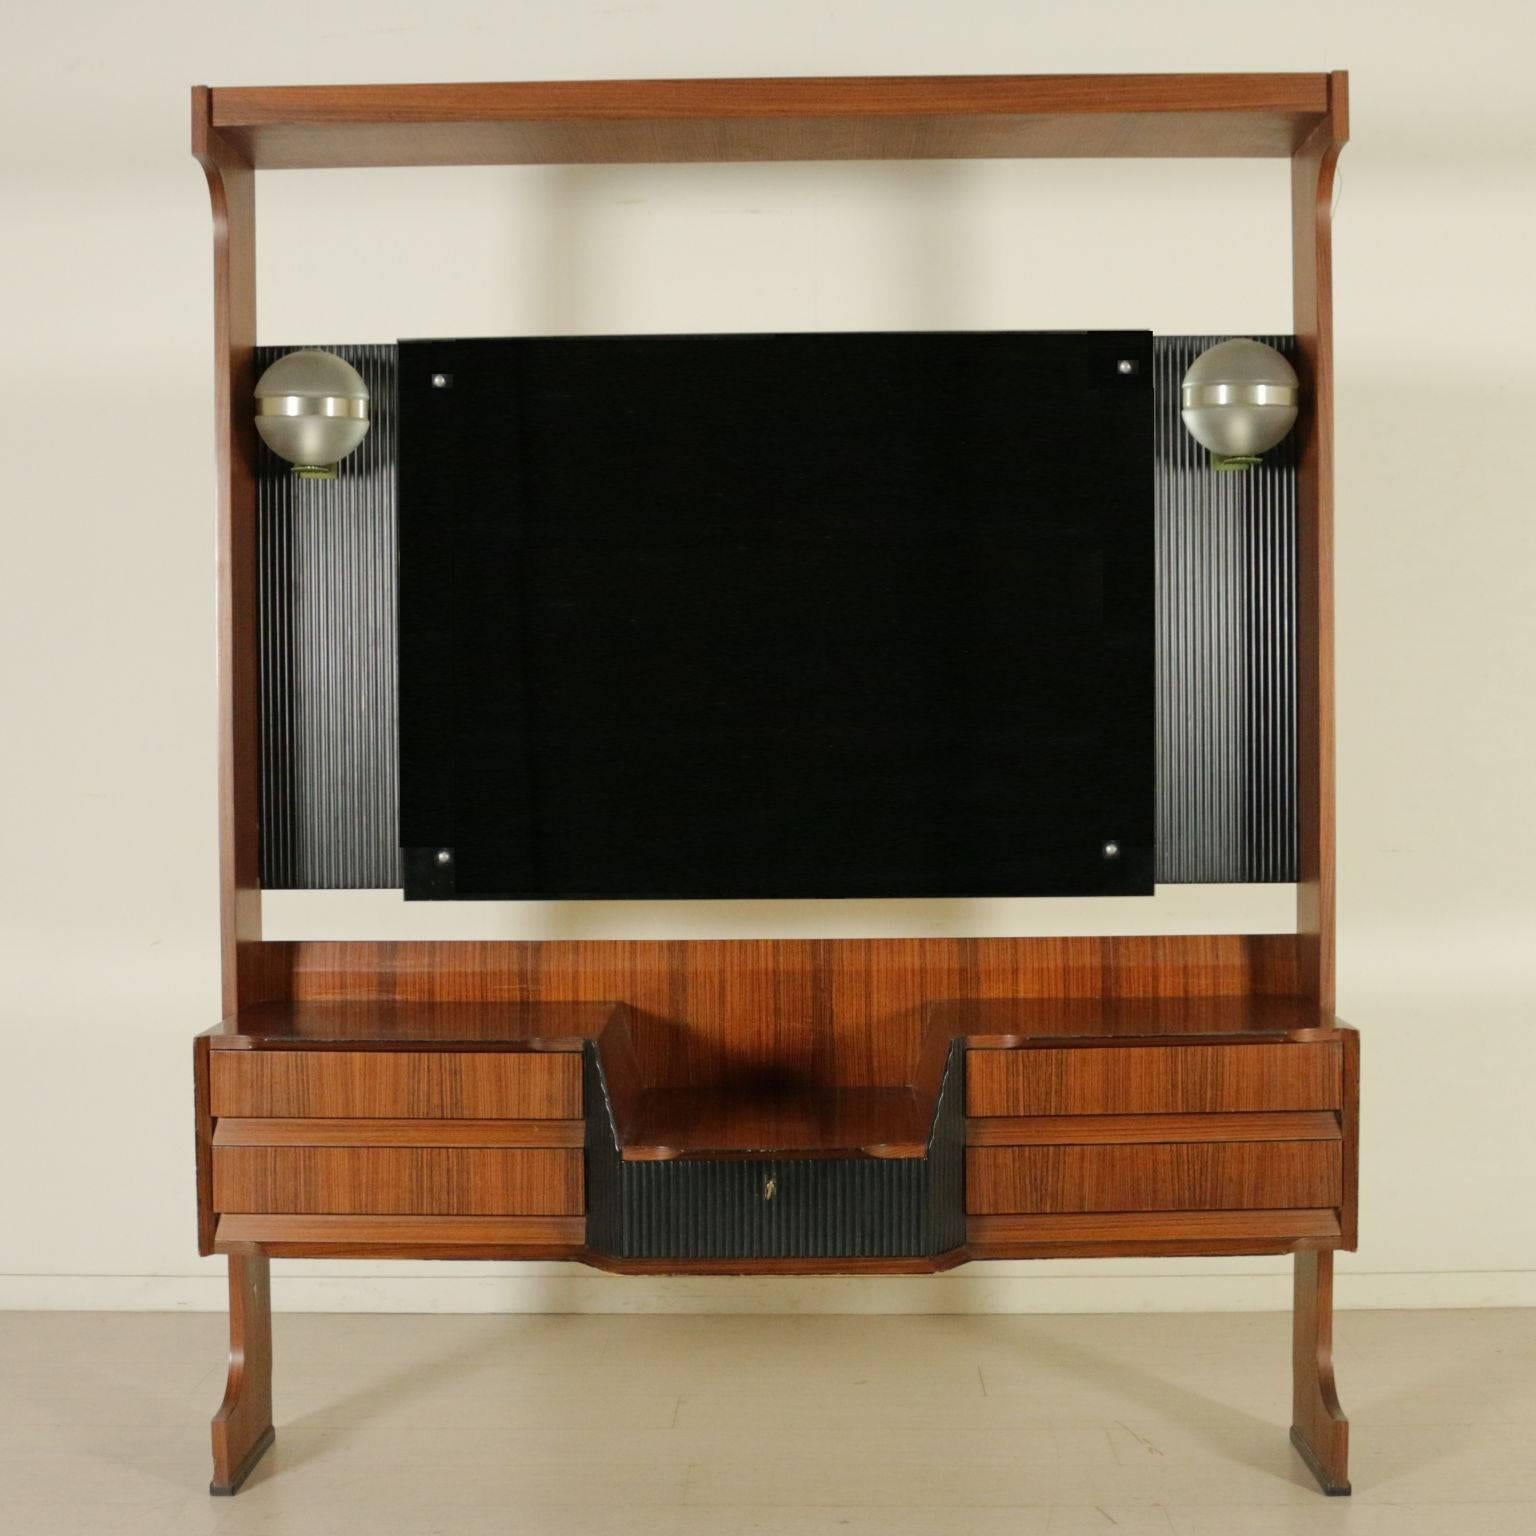 A dressing table with mirror and drawers. Rosewood veneer, stained ebony panels. Manufactured in Italy, 1960s.